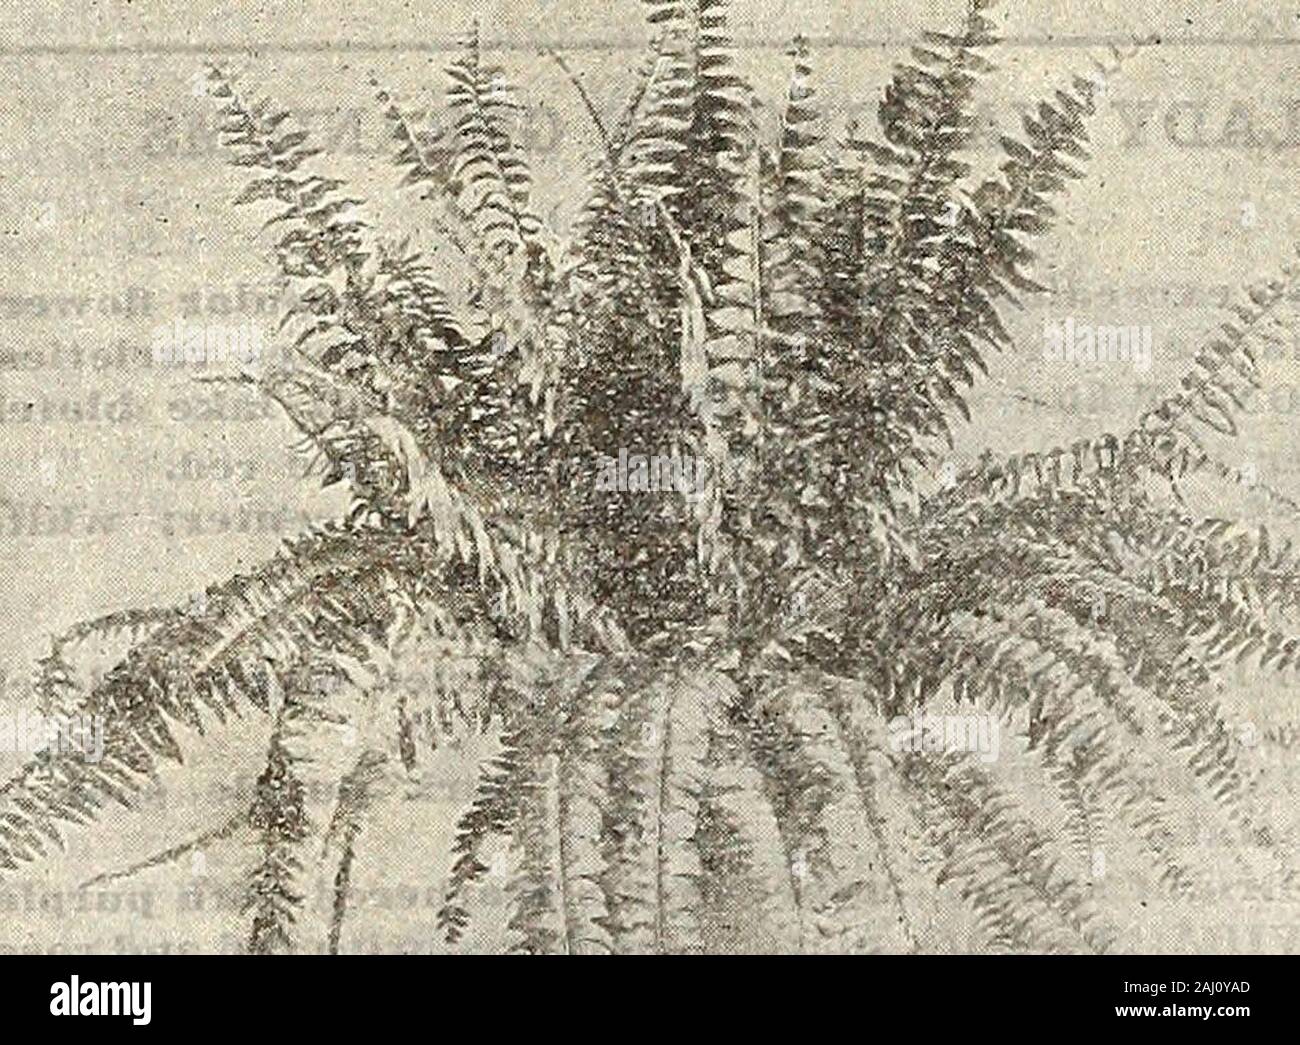 Farm and garden annual : spring 1907 . inch pots $2,Ofto $3.00; very large specimens, from$5.00 to $8.00 each. NEPHROLEPIS SCOTTI. This fern. very appropriatelystyled the Dwarf Boston Fern, is alate introduction of •considerablevalue and beauty. Its habit ofgrowth is much like that of the Bos-ton Fern, its fronds, liowever, beingshorter and narrower, very grace-fully recurving so as to form evenir the oung, undeveloped plant adecidedly attractive specimen. Wel)elieve it will become very popular. JAPANESE FER]^ BALL.Davallia Btillata. Makes a very handsome ornamentfor the conservatory or parlo Stock Photo